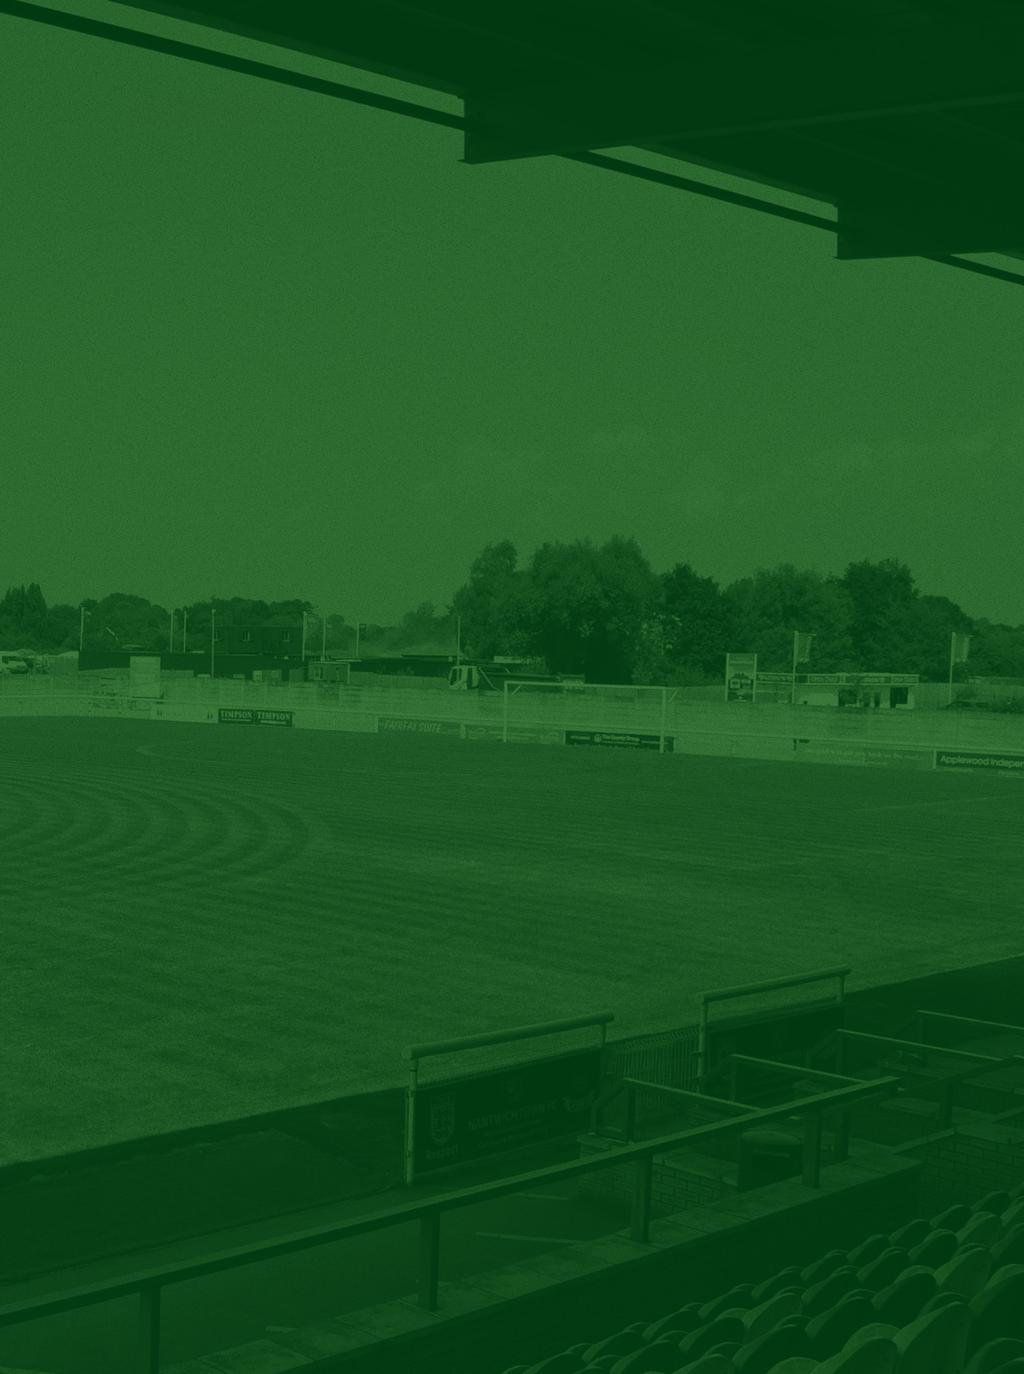 THE WEAVER STADIUM Address Nantwich Town Football Club The Weaver Stadium Waterlode Nantwich Cheshire CW5 5BS Ground Capacity 3,500 with 300 seats General Admission Prices Adults 10 Concessions 7